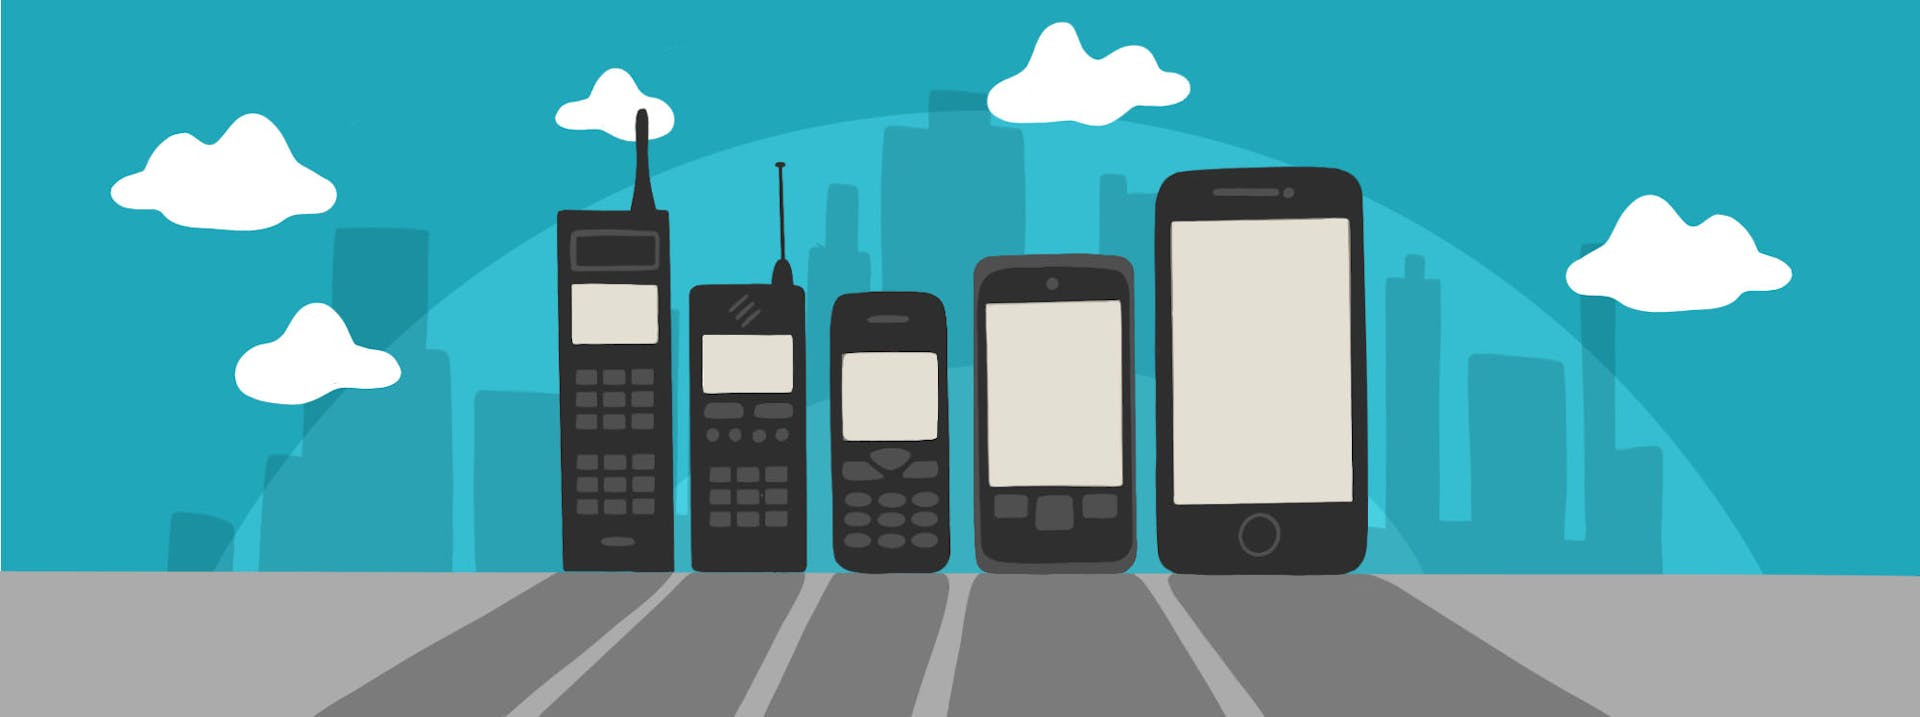 Illustration of a row of mobile phones from an old 1990s handset to a modern smartphone, with a blue background studded with white fluffy clouds